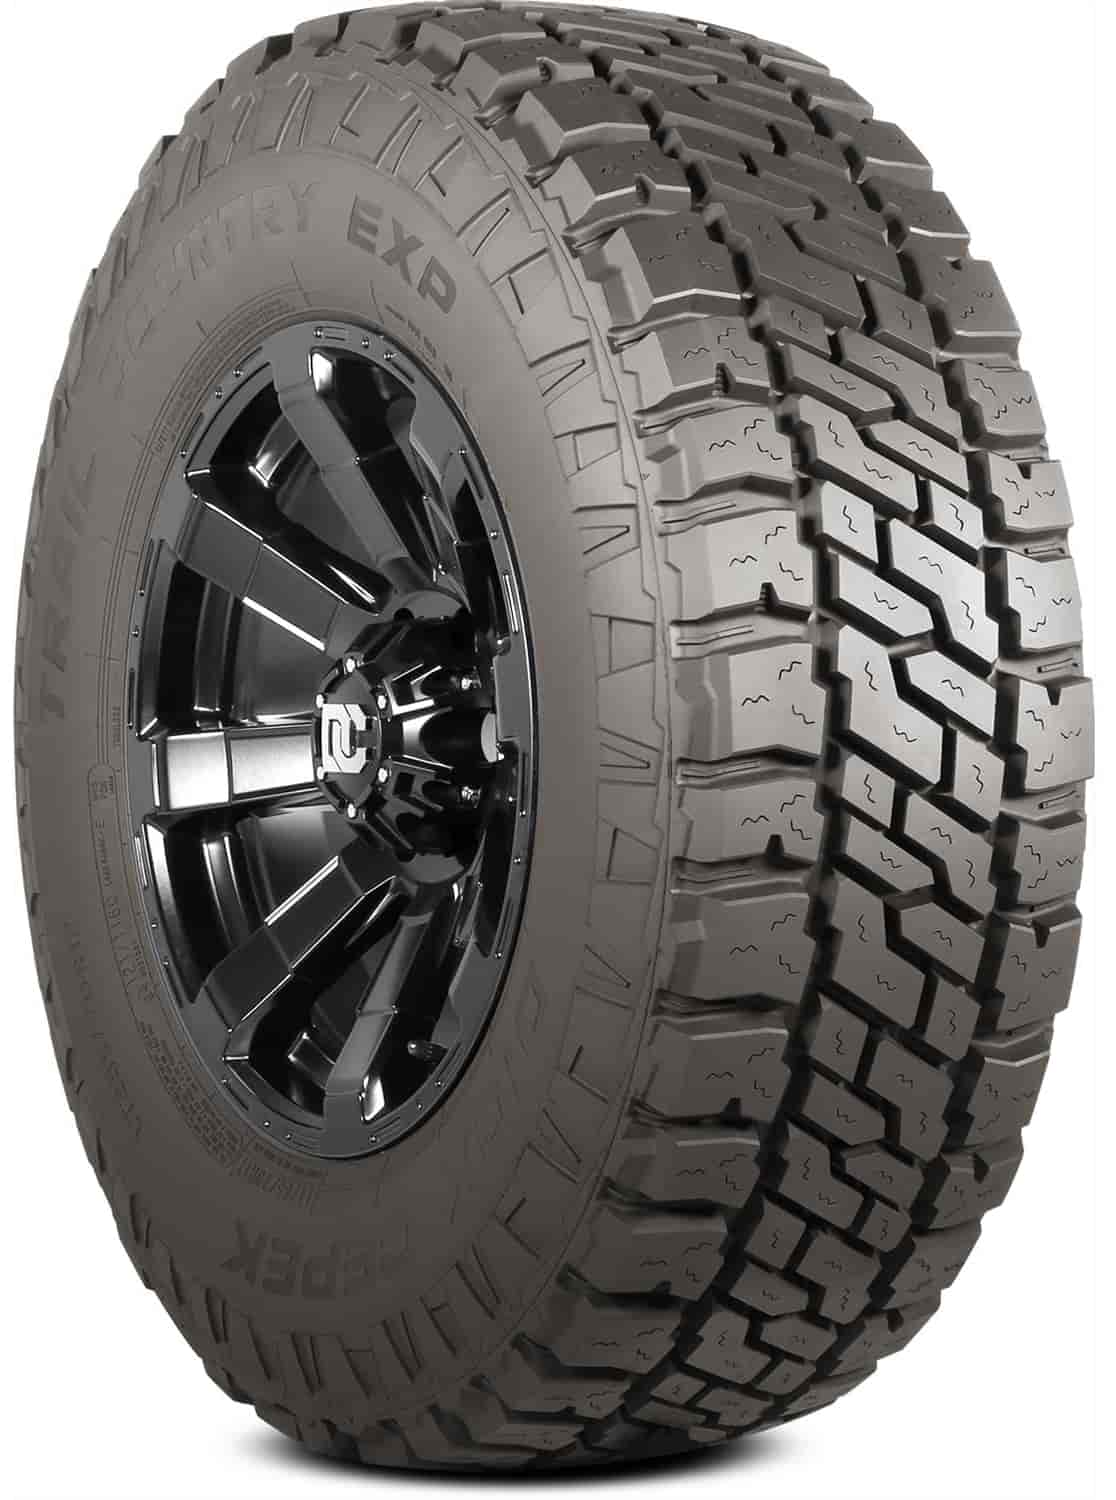 Trail Country EXP Tire LT275/65R20